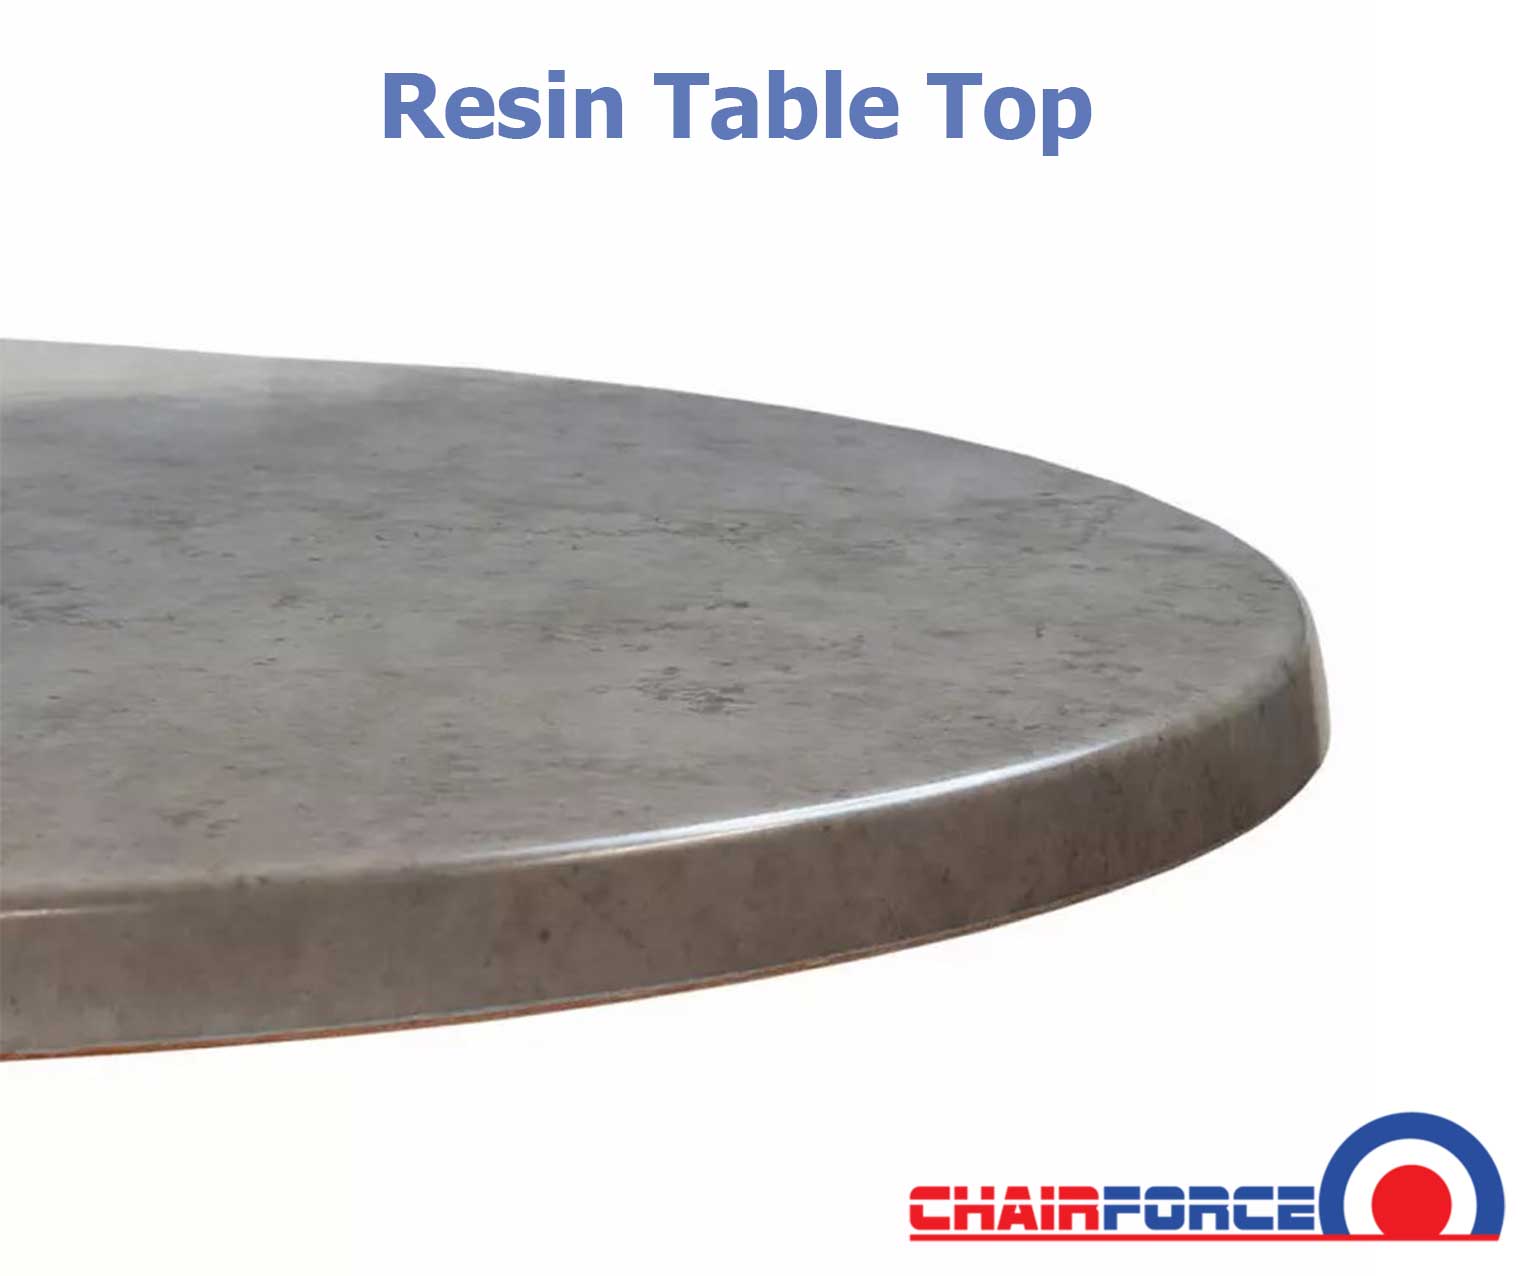 Table Top Resin